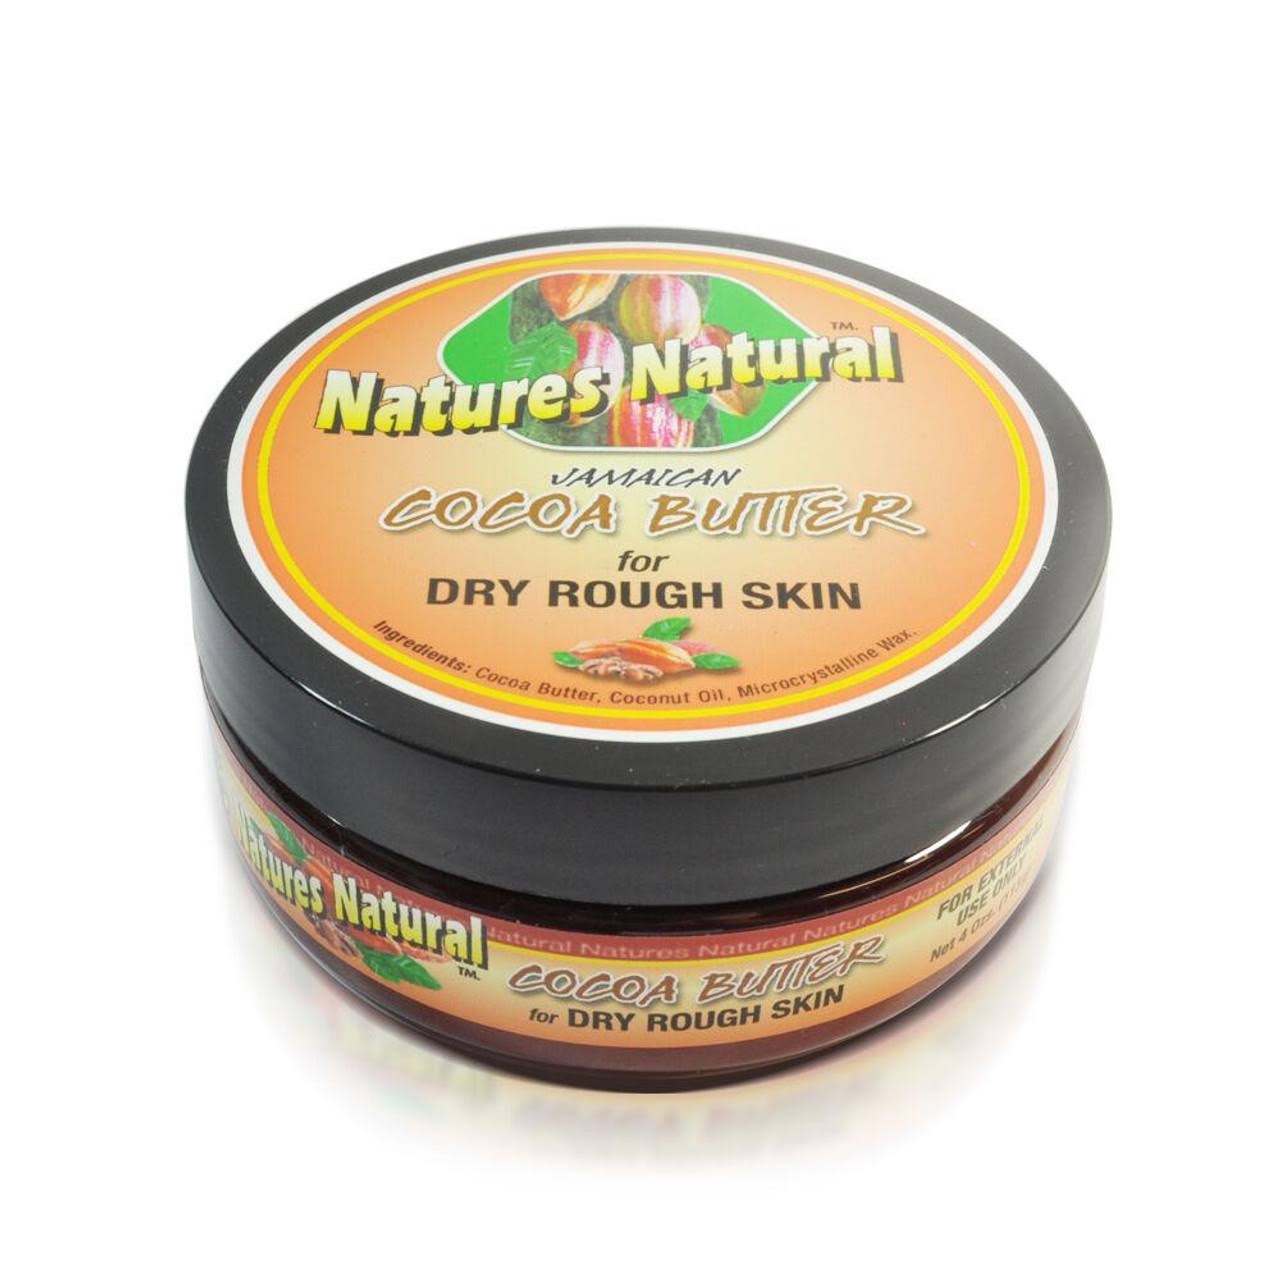 Natures natural jamaican cocoa butter for dry rough skin 4 oz